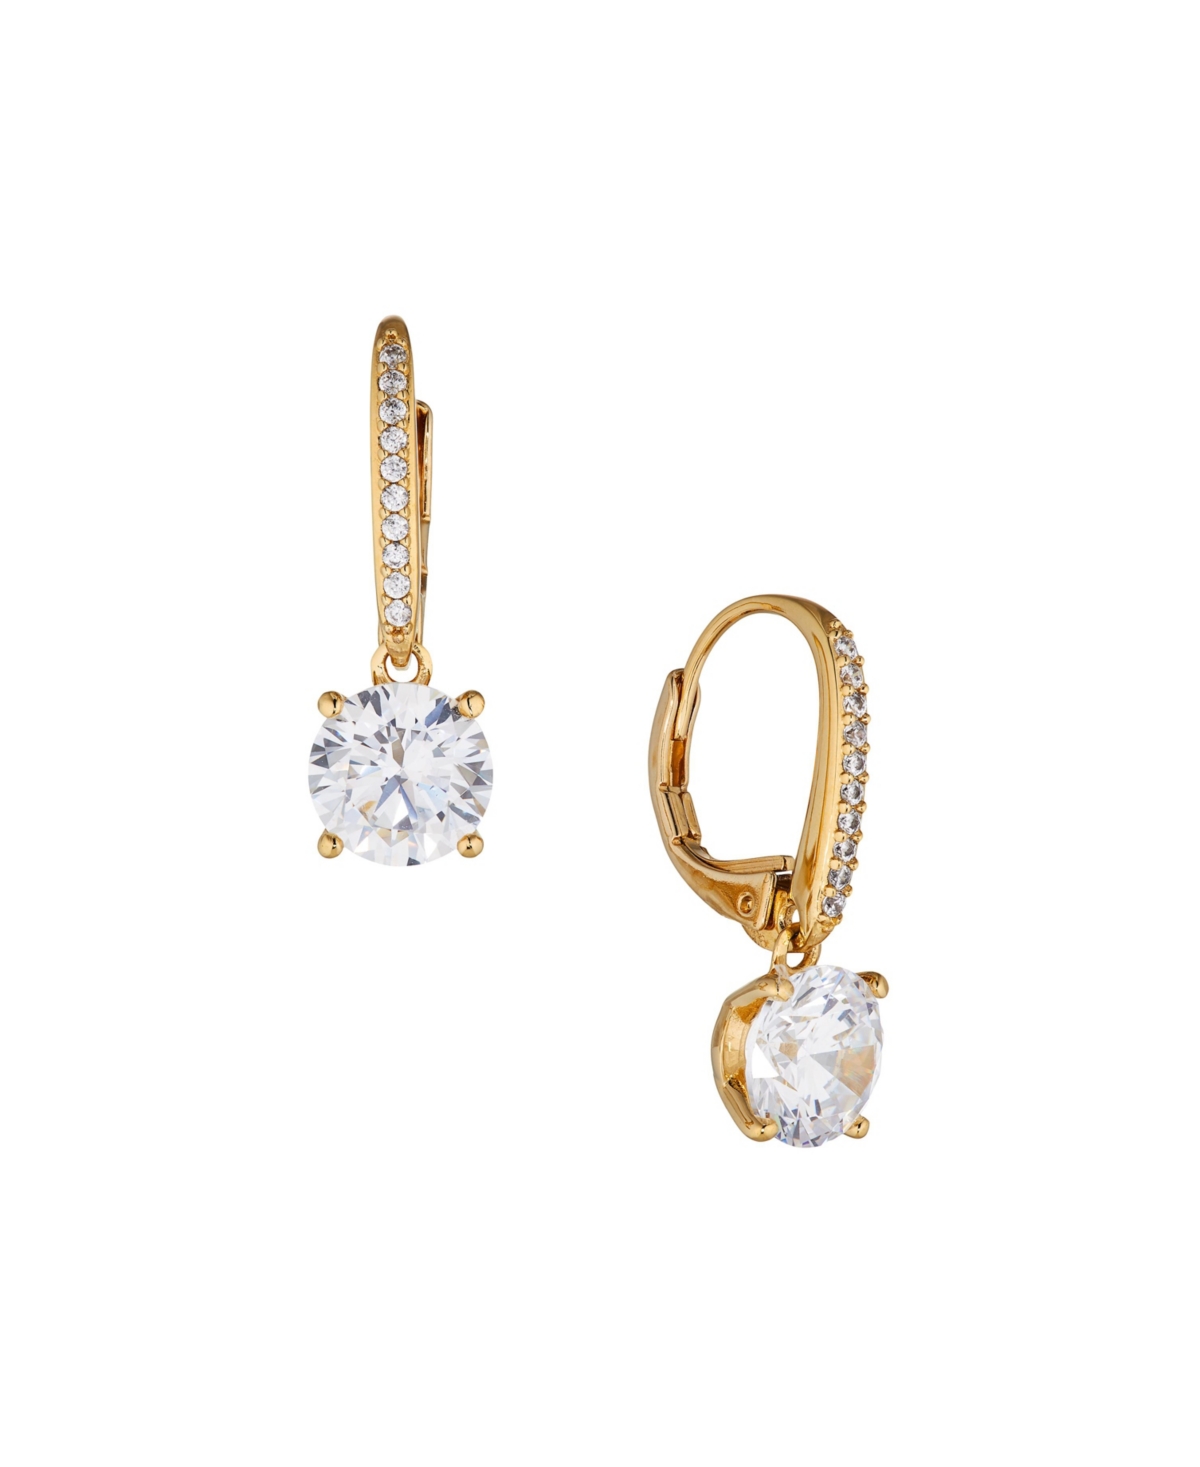 Eliot Danori 18k Gold Plated Leverback Earrings, Created For Macy's In Gold-plated